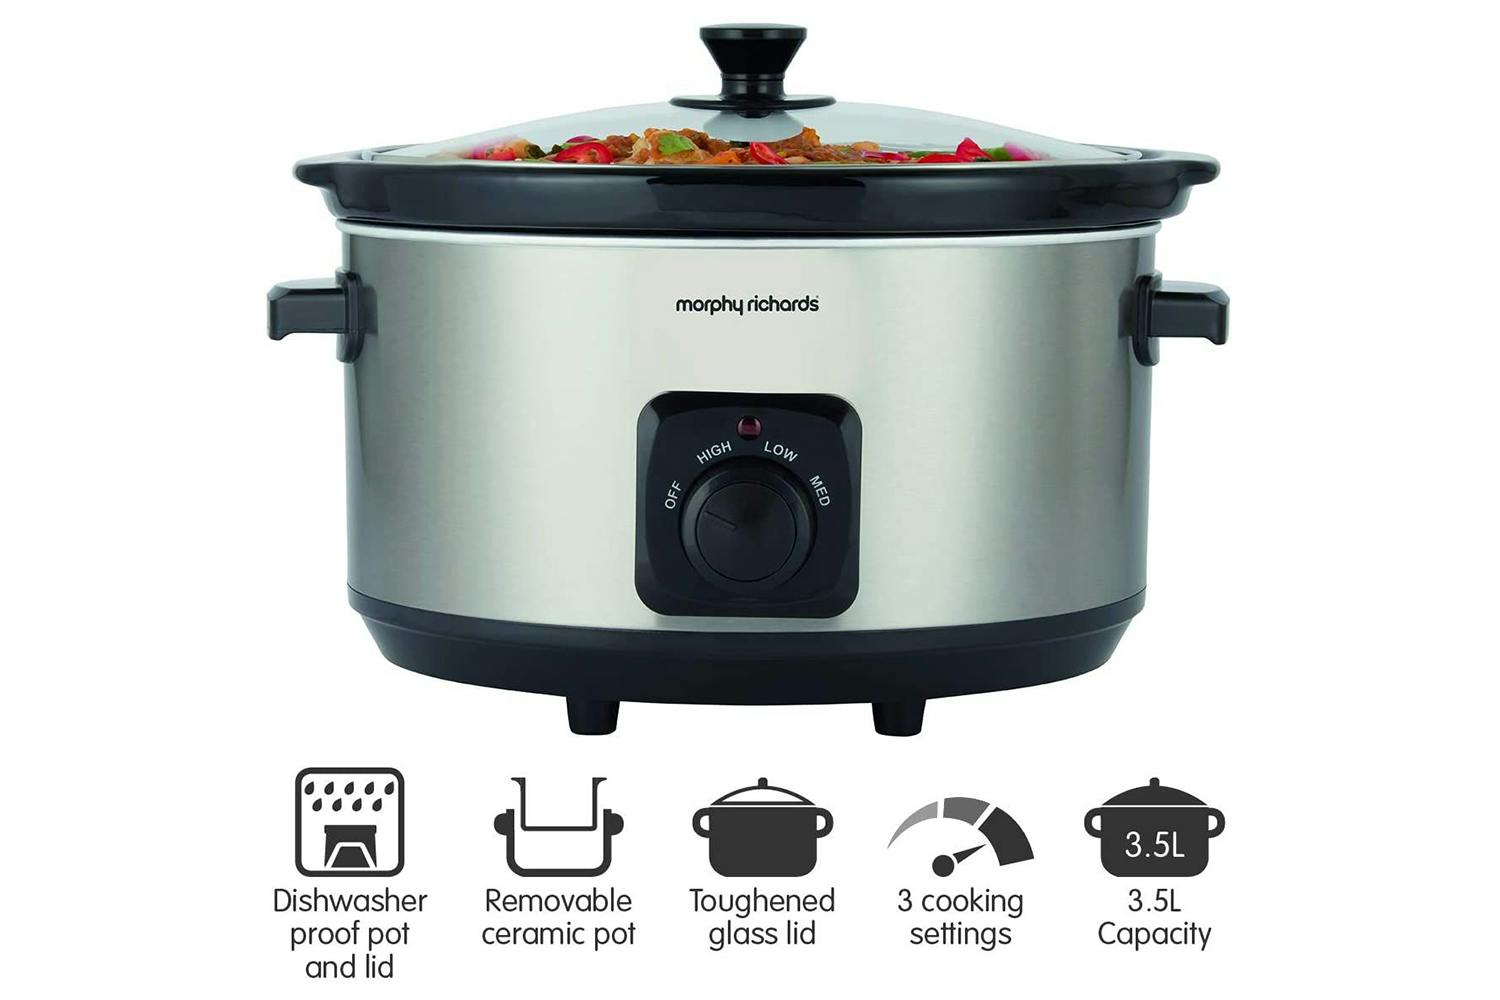 Buy Morphy Richards 6.5L Auto-Stir Slow Cooker - Stainless Steel